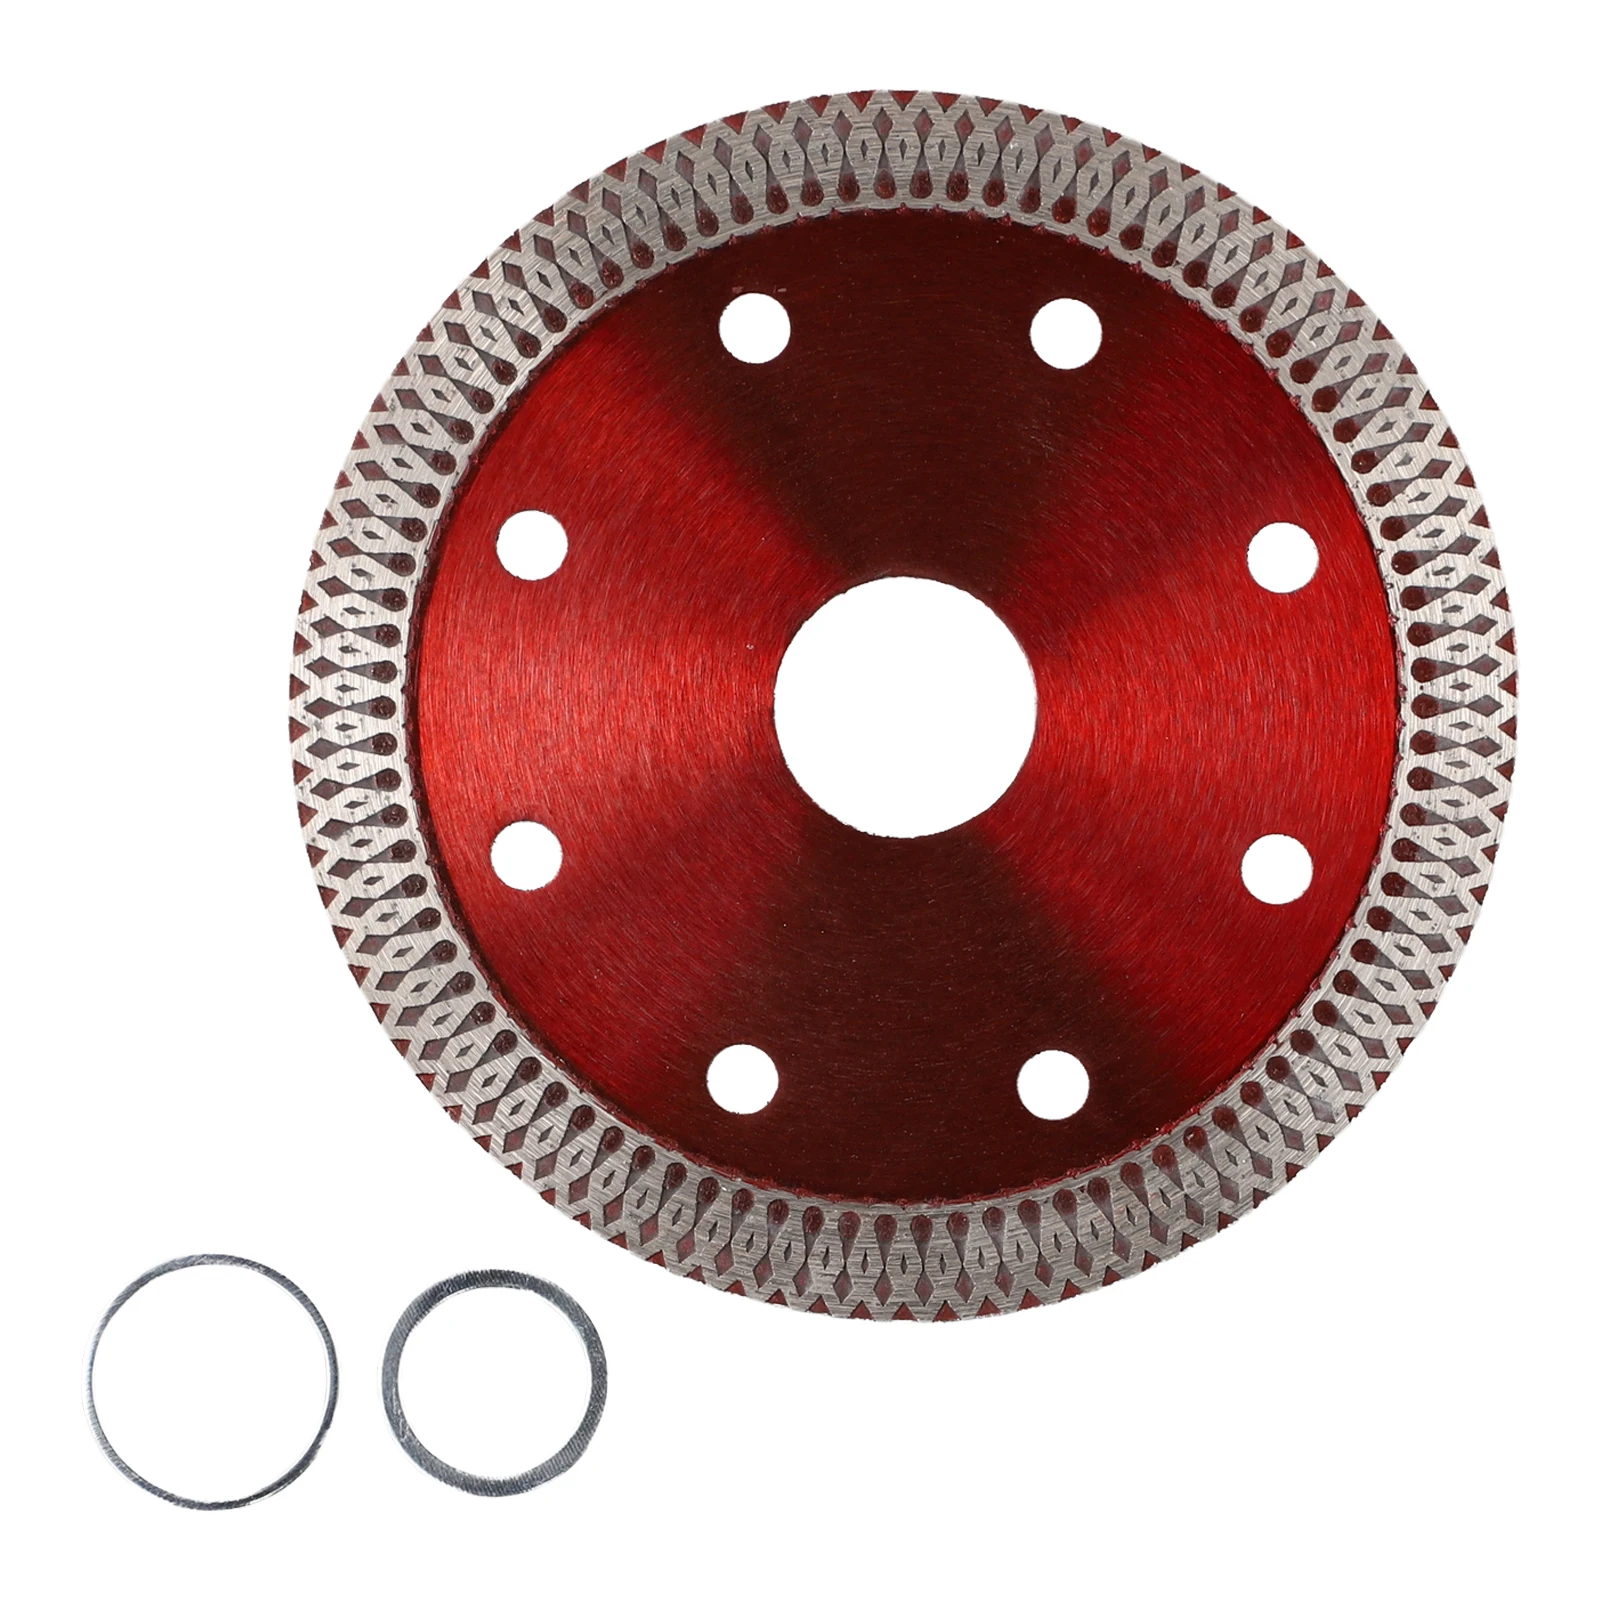 

Disc Diamond Saw Blade For Granite Marble Tile 4/4.5/5in X Teeth 100/115/125mm Dry/wet Cutting Oscillating Tool